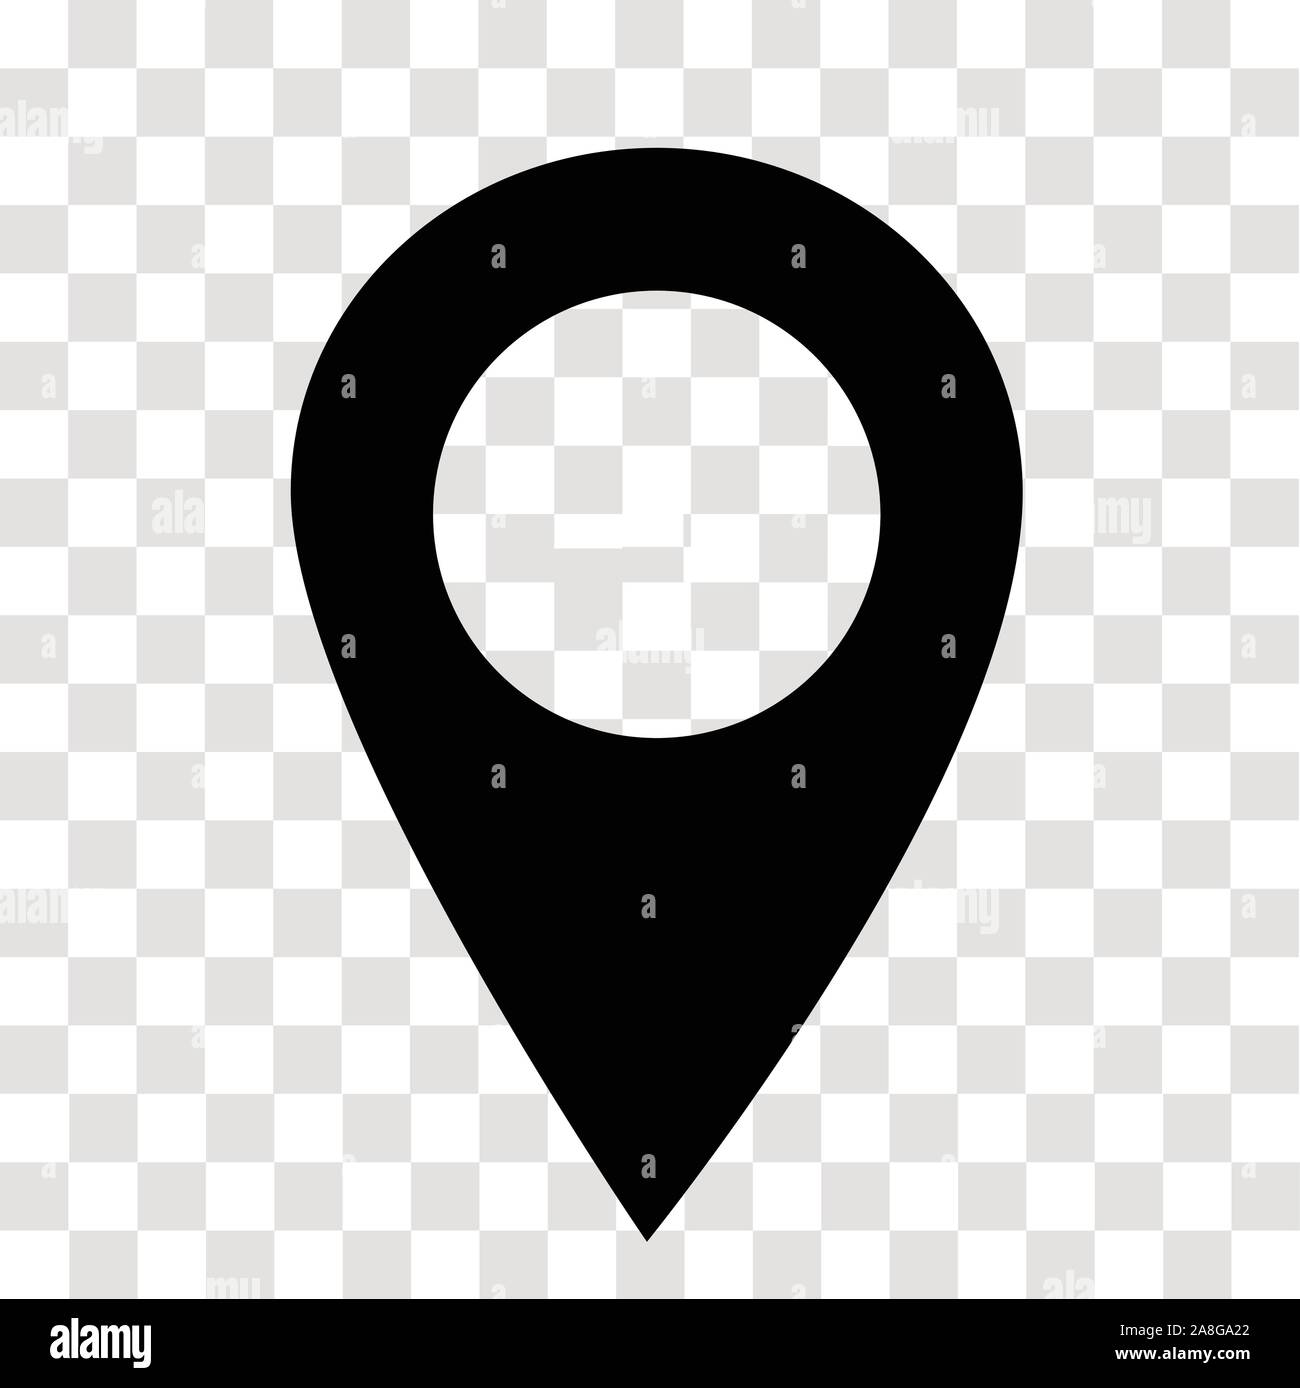 Location pin Black and White Stock Photos & Images - Alamy